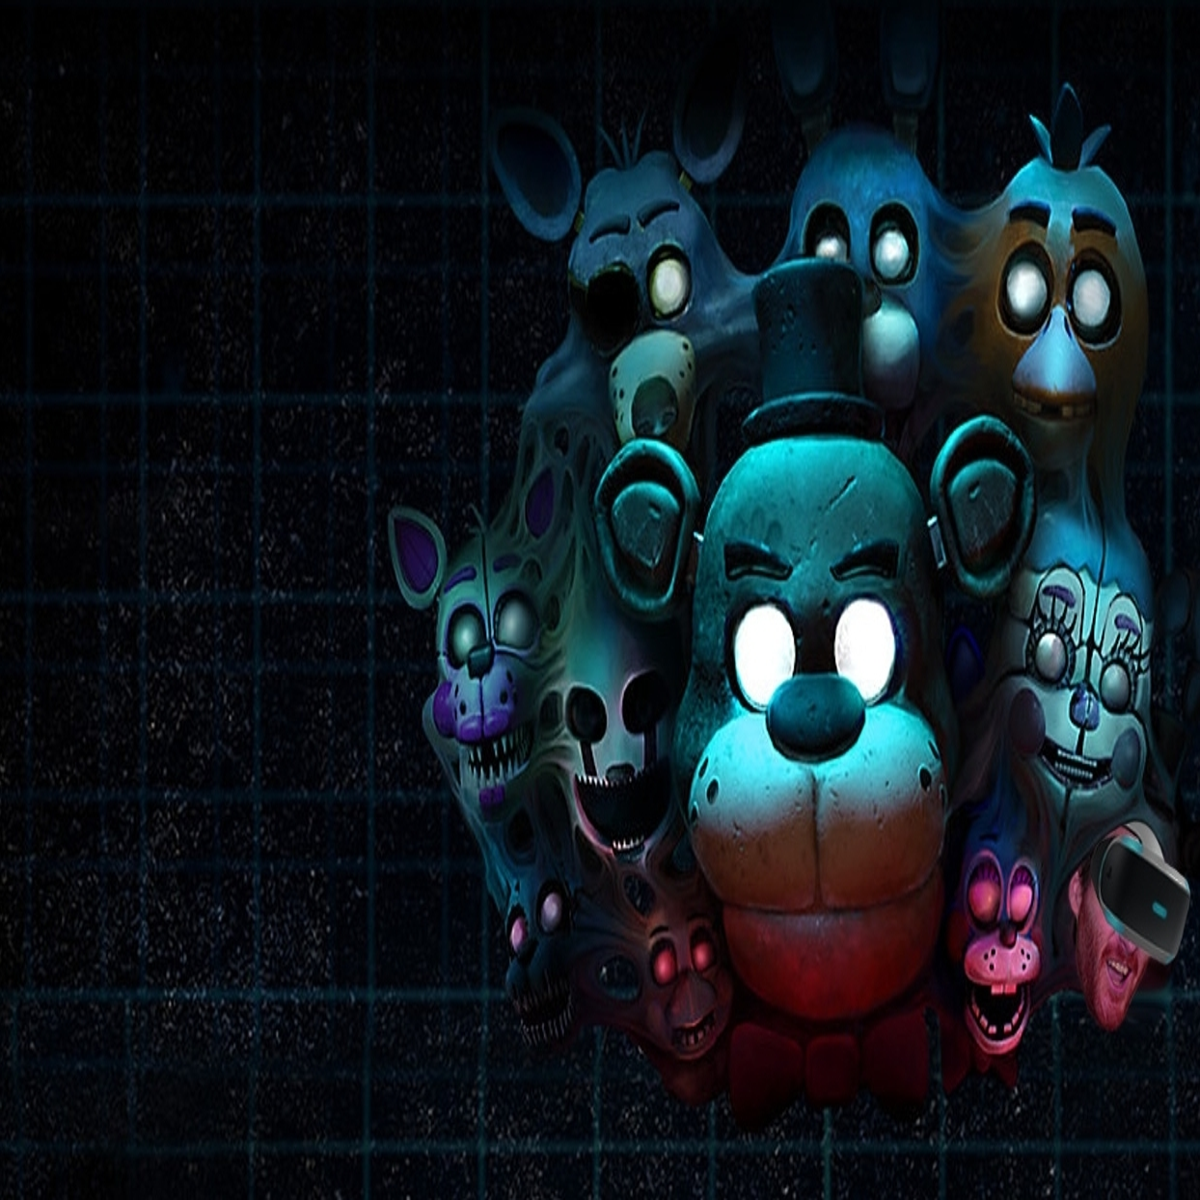 THE GOOD ENDING??  Five Nights at Freddy's 4 - Part 6 